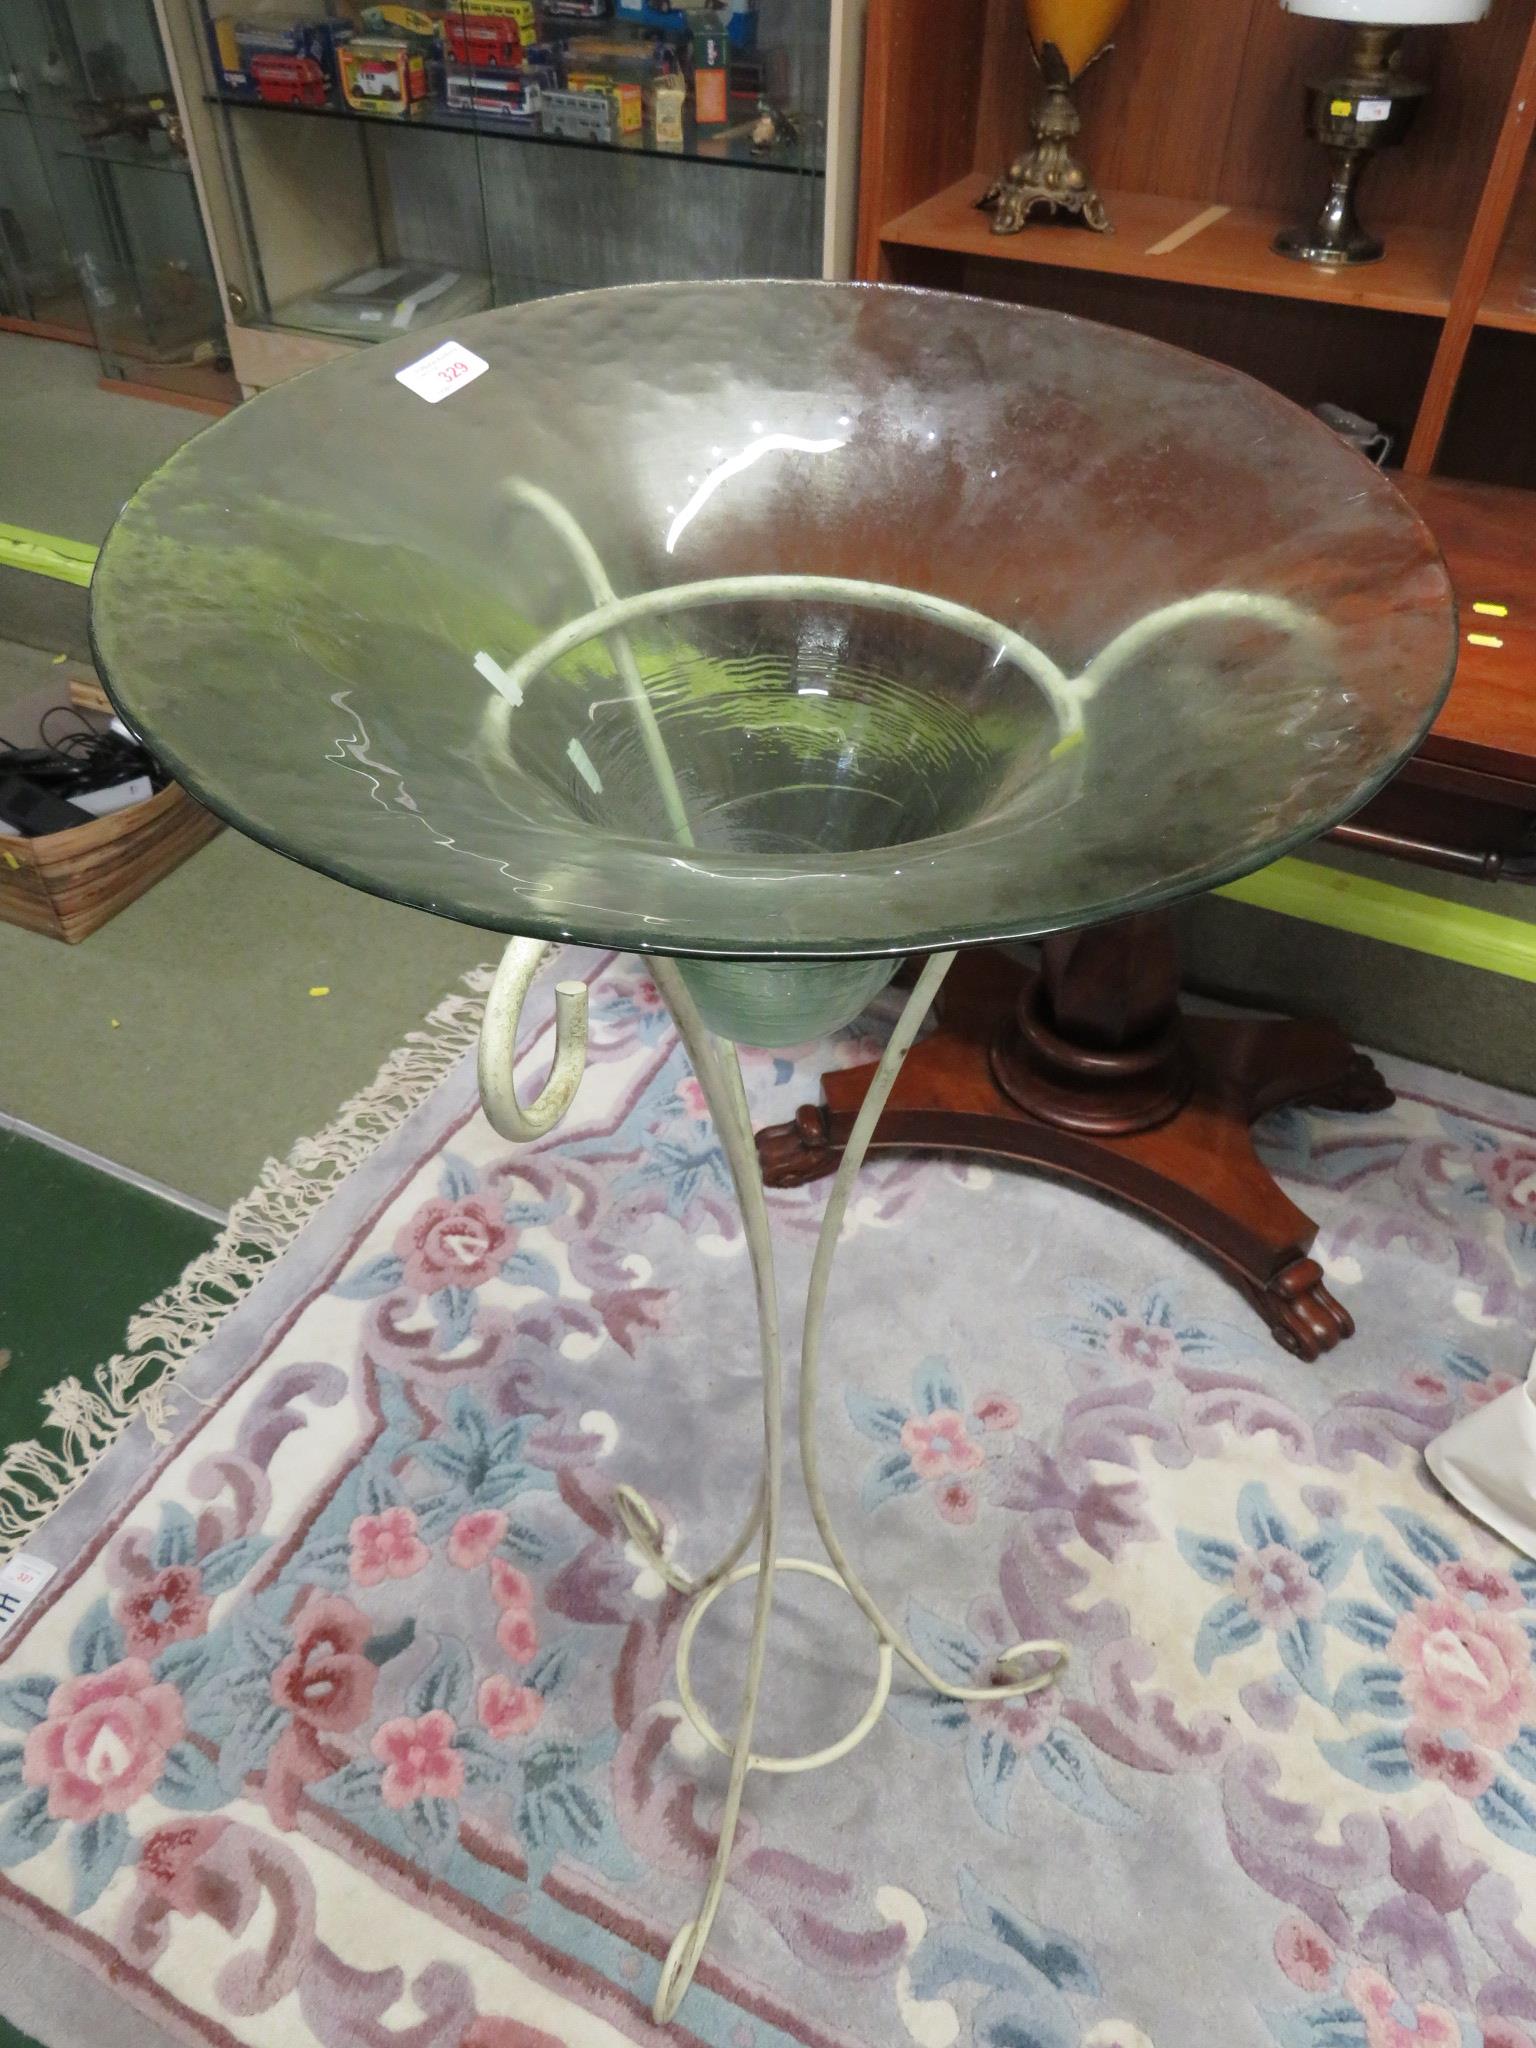 LARGE MODERN GLASS DECORATIVE BOWL ON METAL STAND.